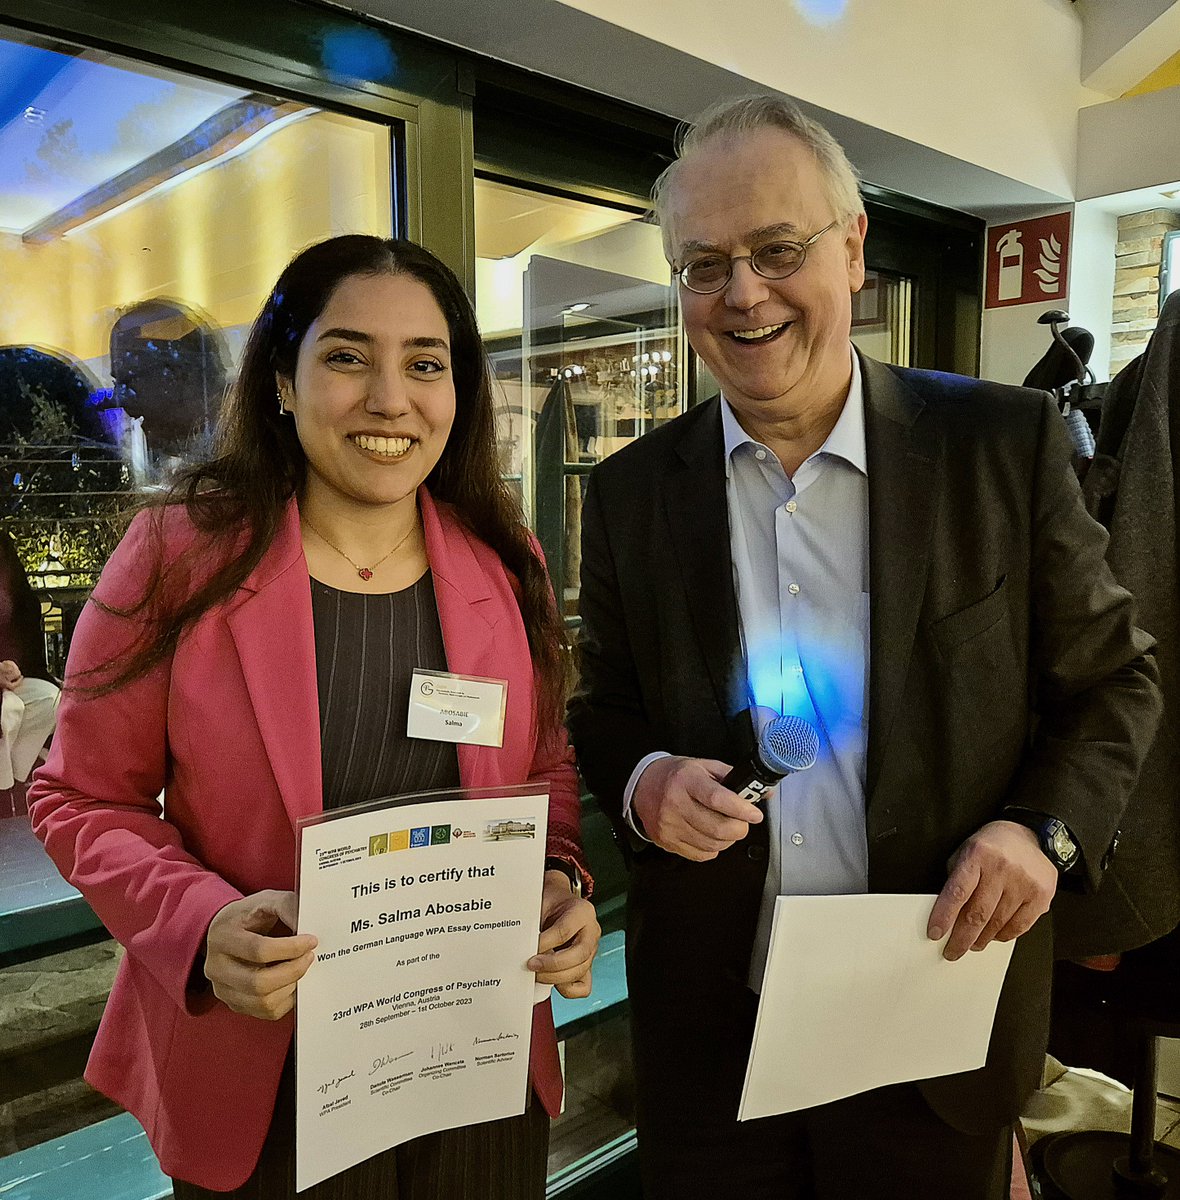 #WPA🌐

@WPA_Psychiatry invited medical students to submit an essay on the “The Interface of Physical and Mental Health”🎓

The winner in the category german-speaking essay is @Salma9abosabie from @uni_wue. The award was handed over by @JWancata during #OEGPP24

Congratulations💐